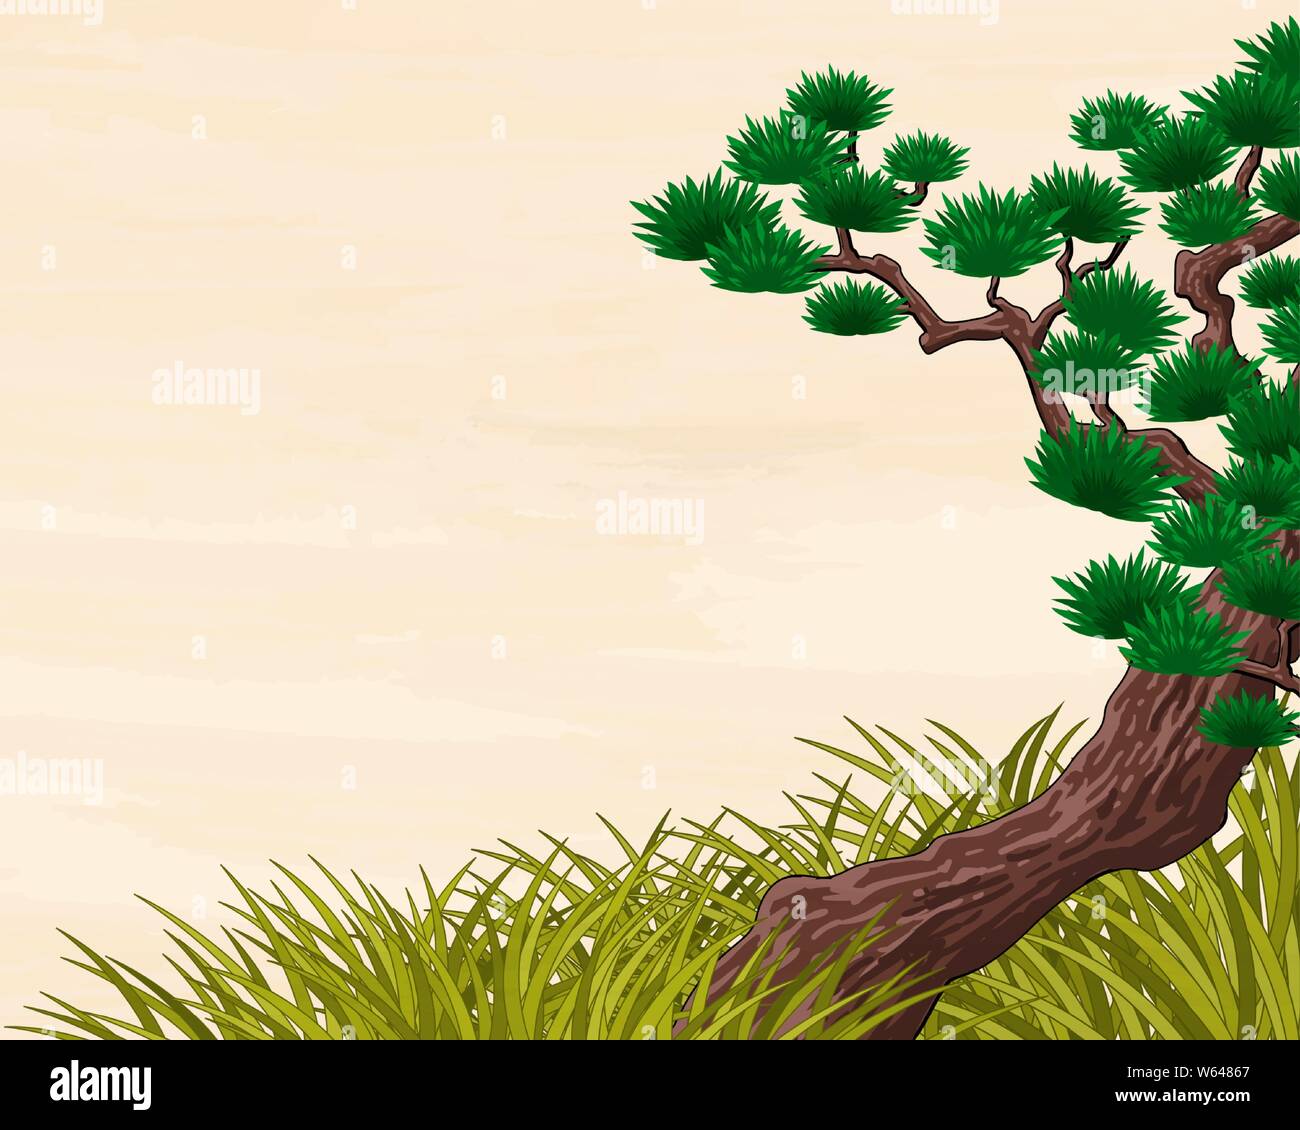 Traditional Japan pine tree scenery with grass Stock Vector